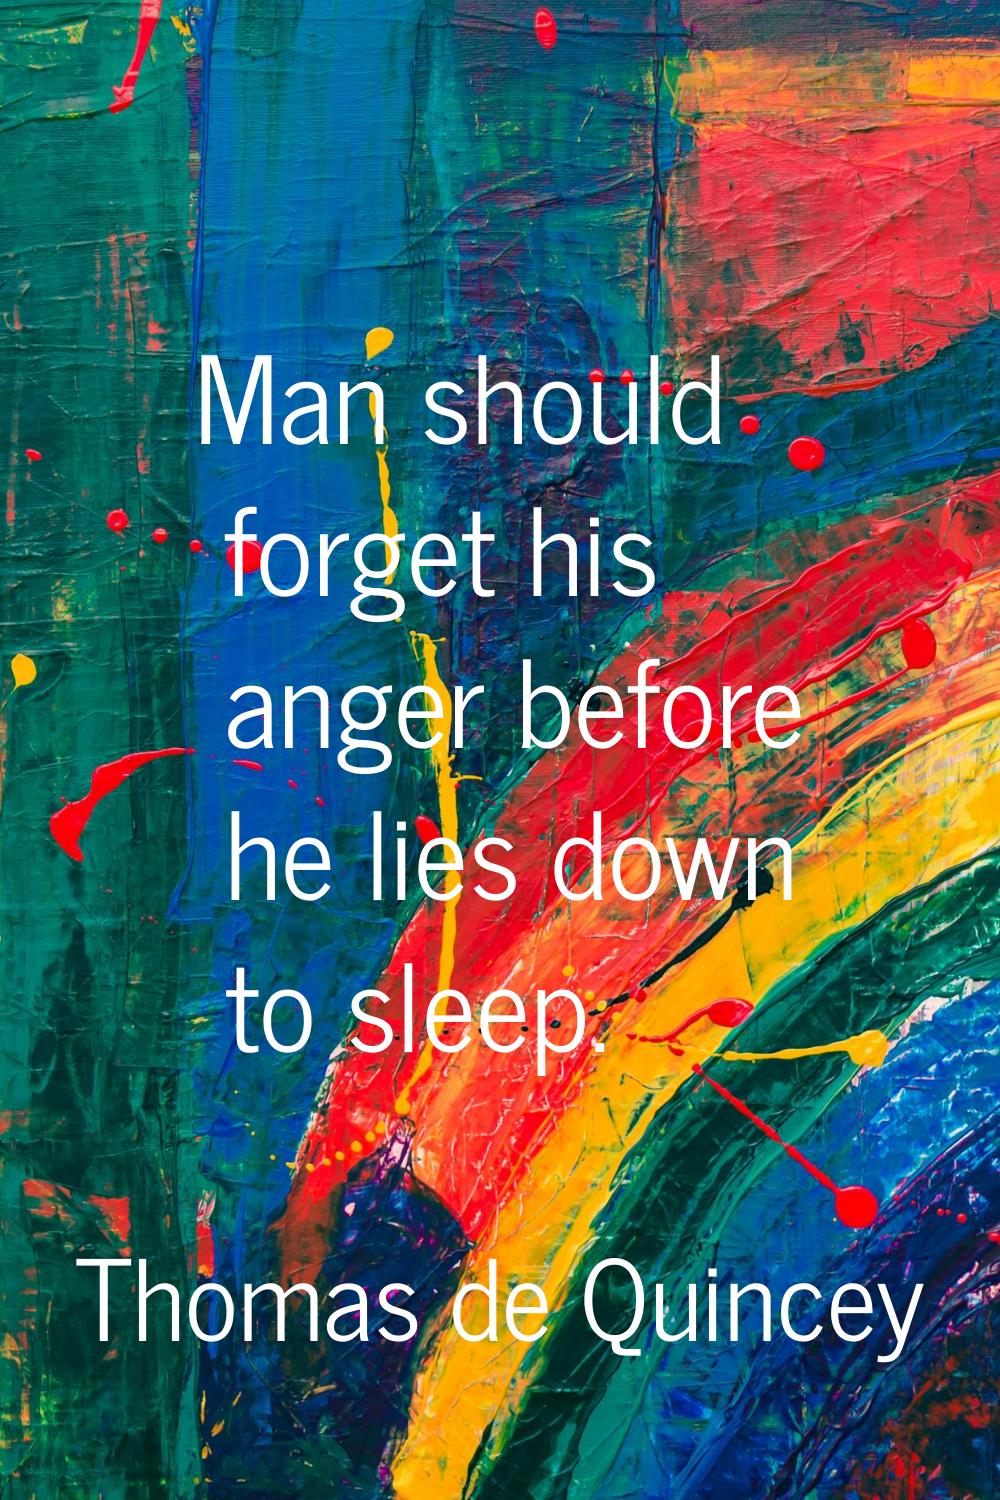 Man should forget his anger before he lies down to sleep.